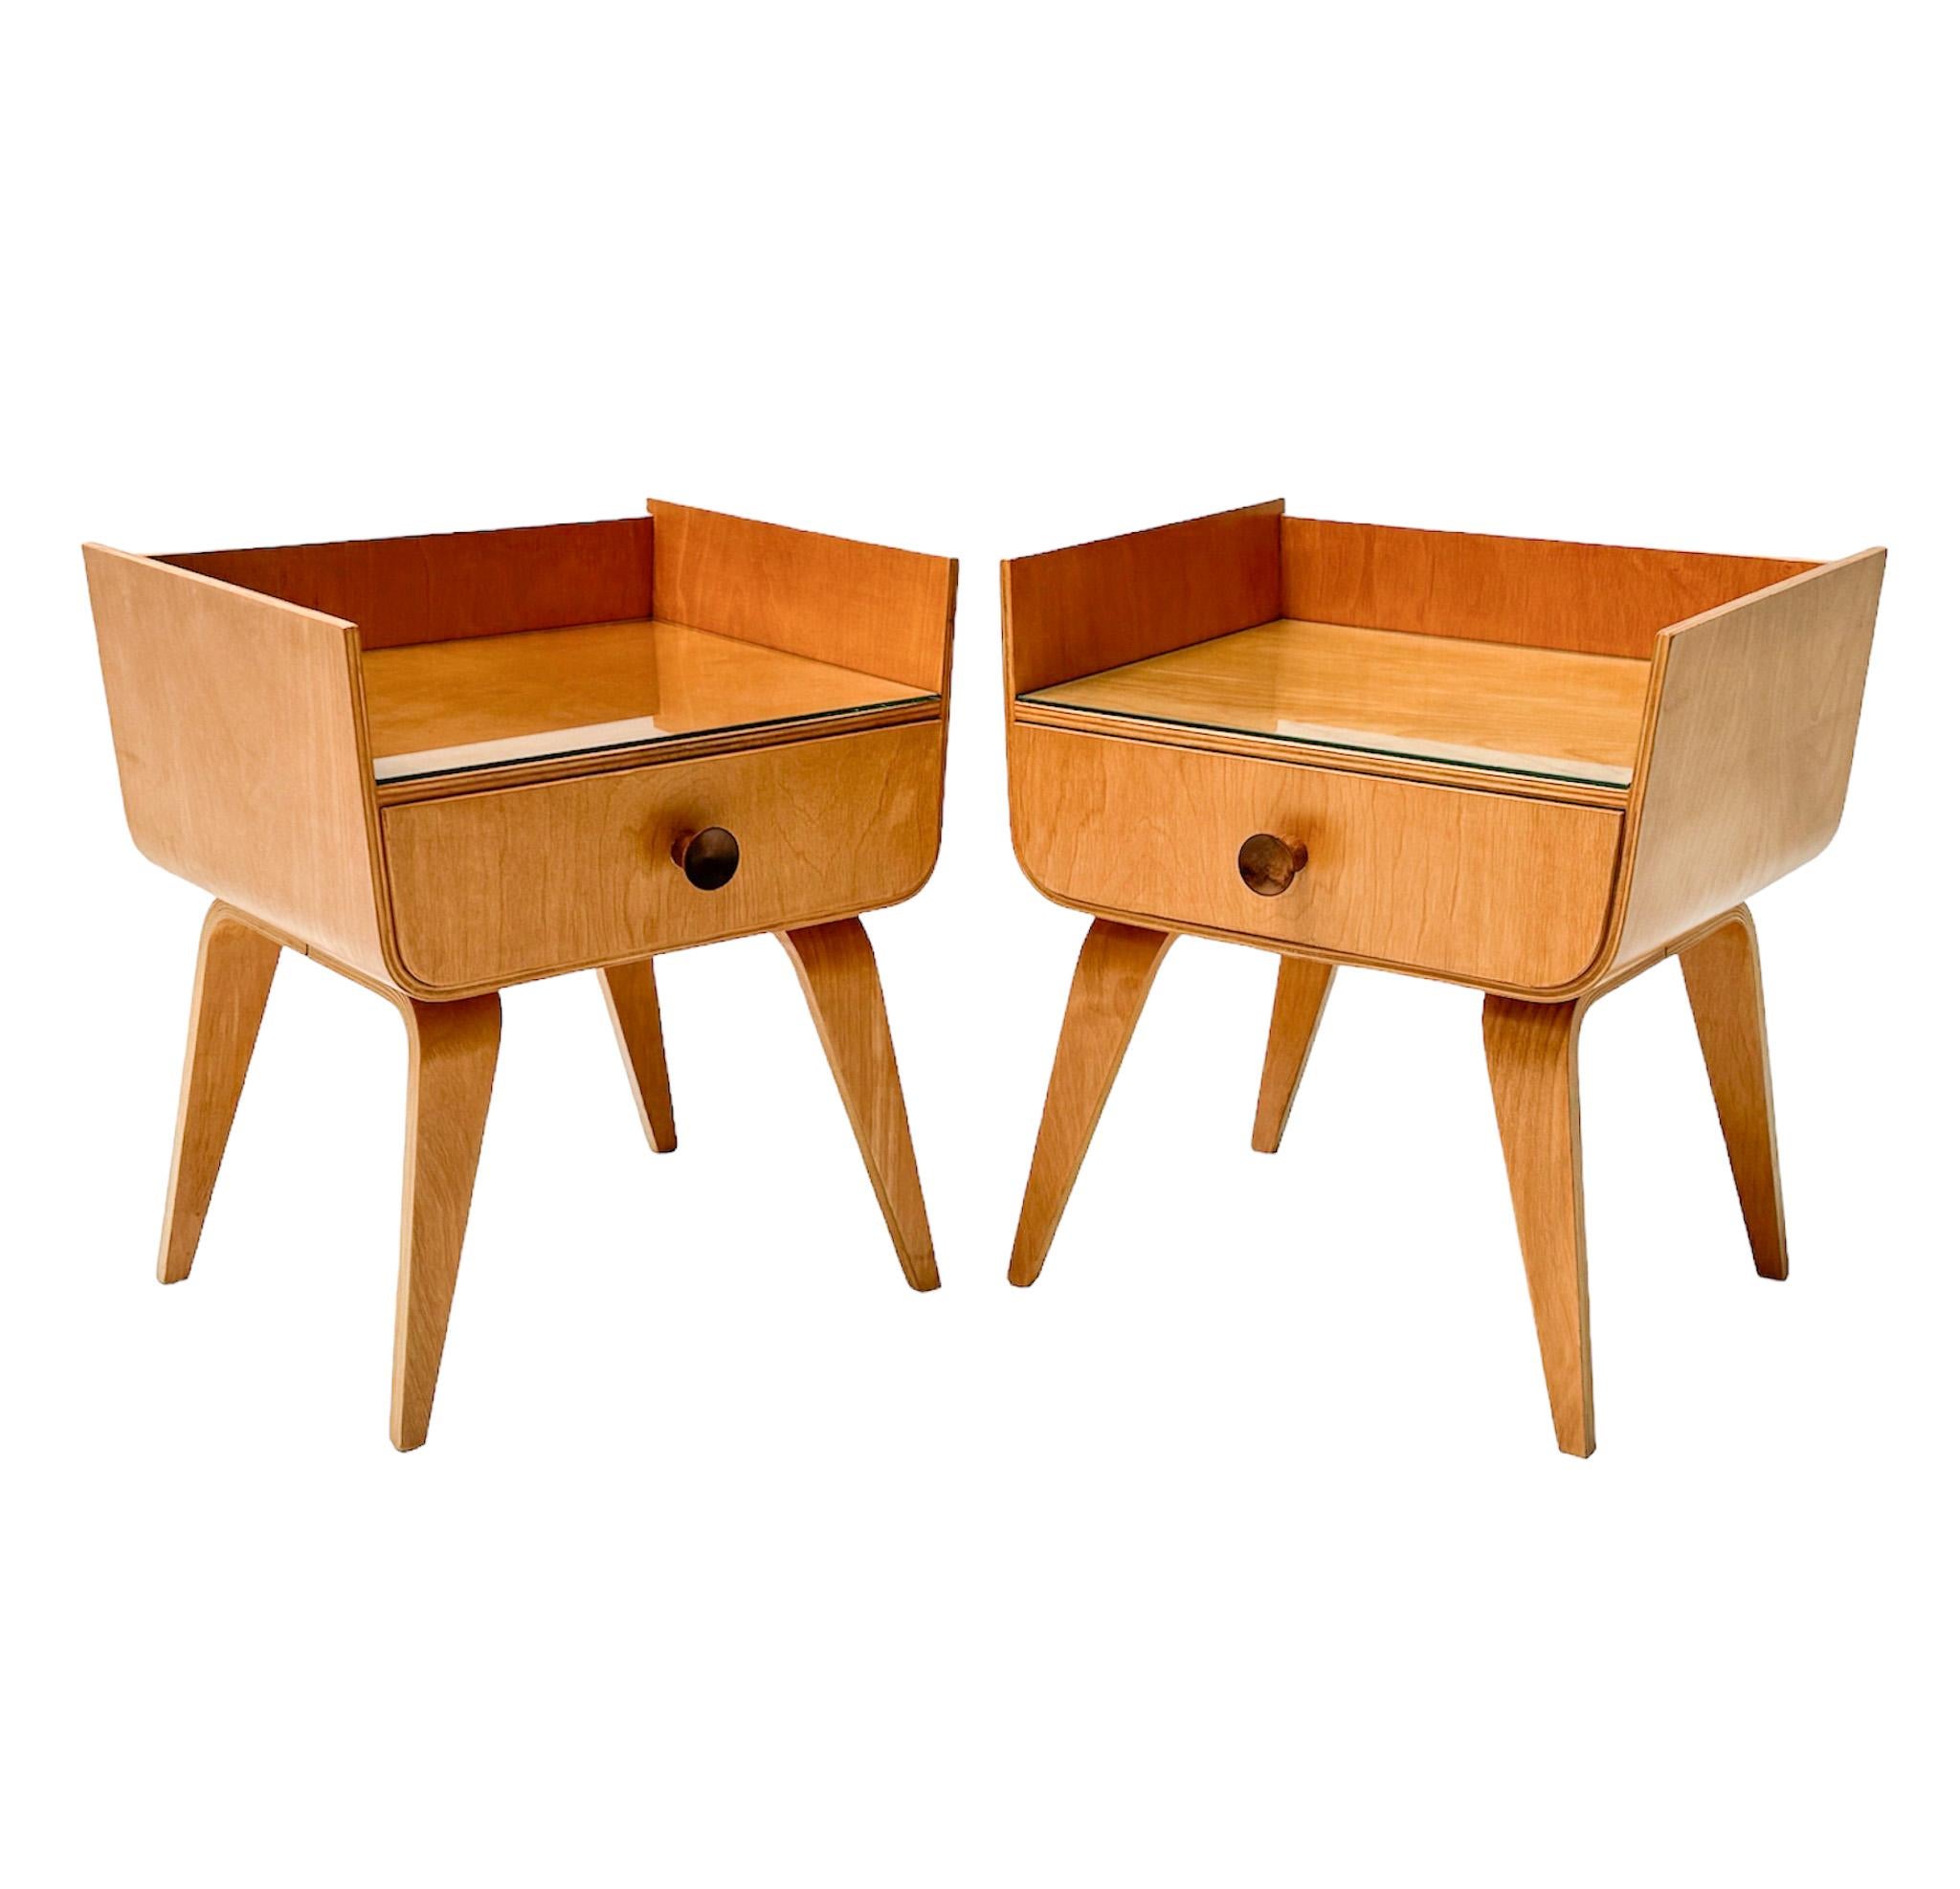 Mid-20th Century  Birch Mid-Century Modern Nightstands or Bedside Tables by Cor Alons, 1949